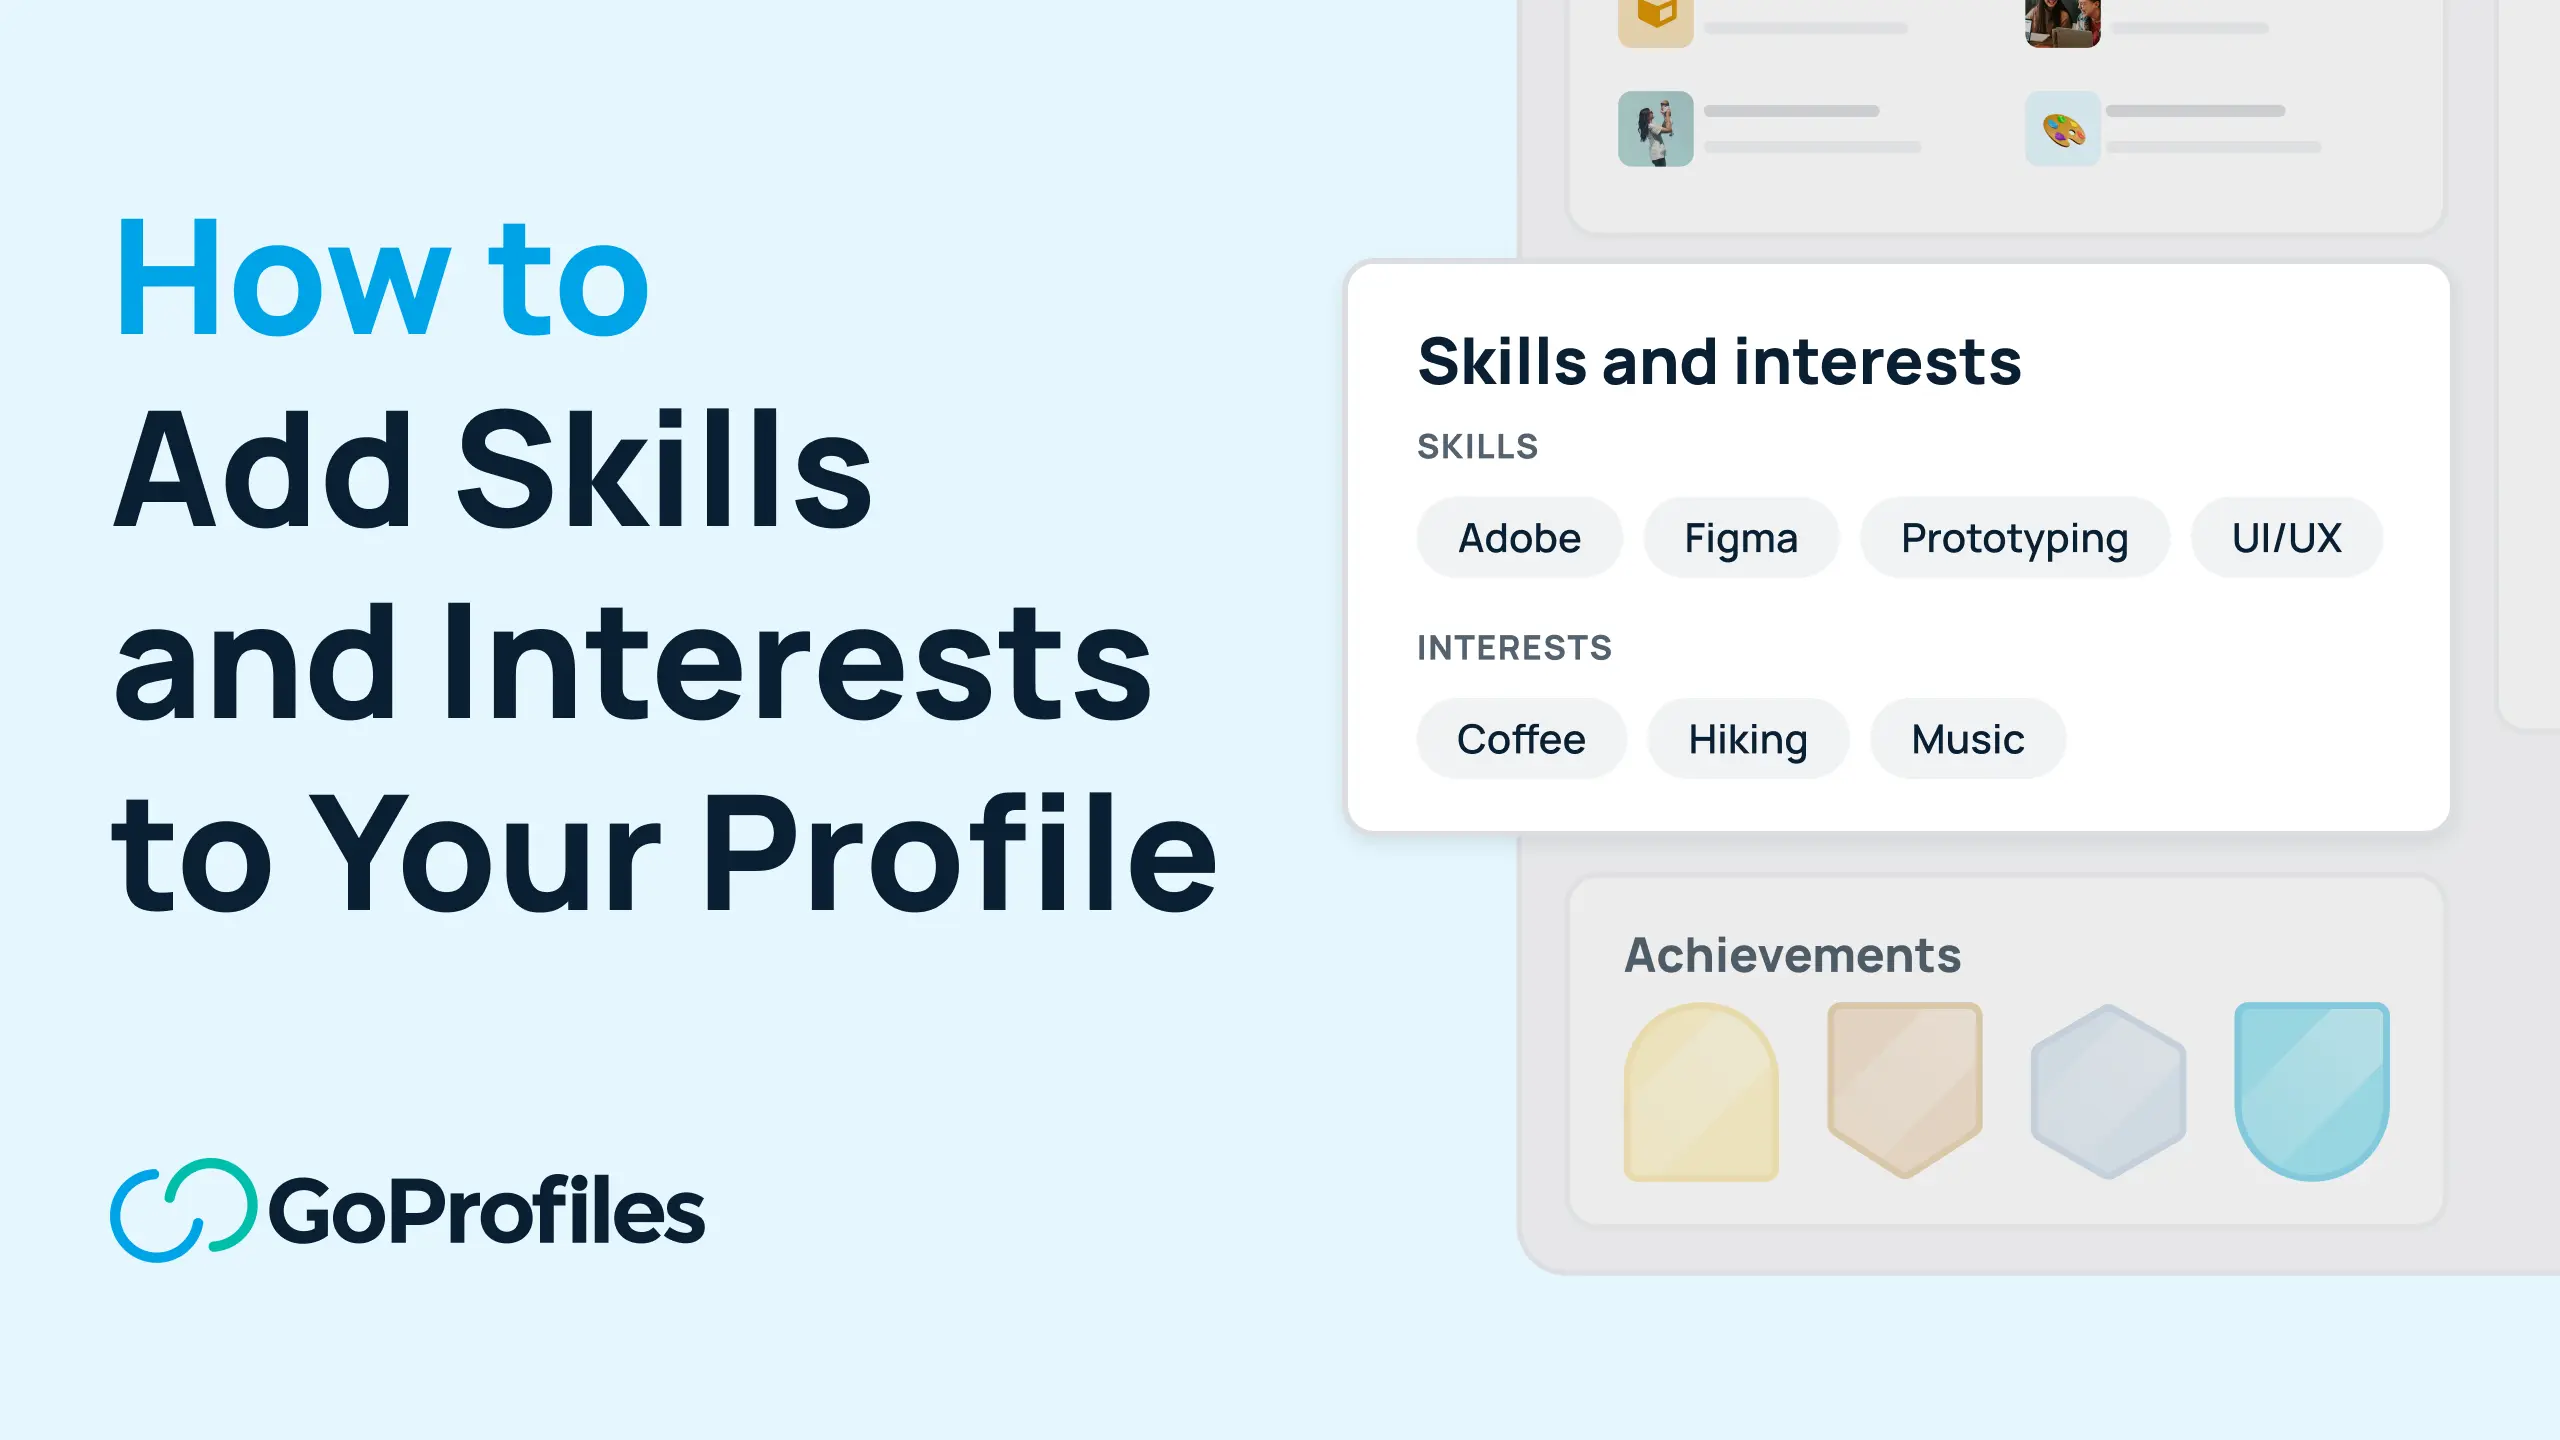 GoProfiles for Employee Engagement: Interactive video walkthrough of the GoProfiles Skills and Interests feature